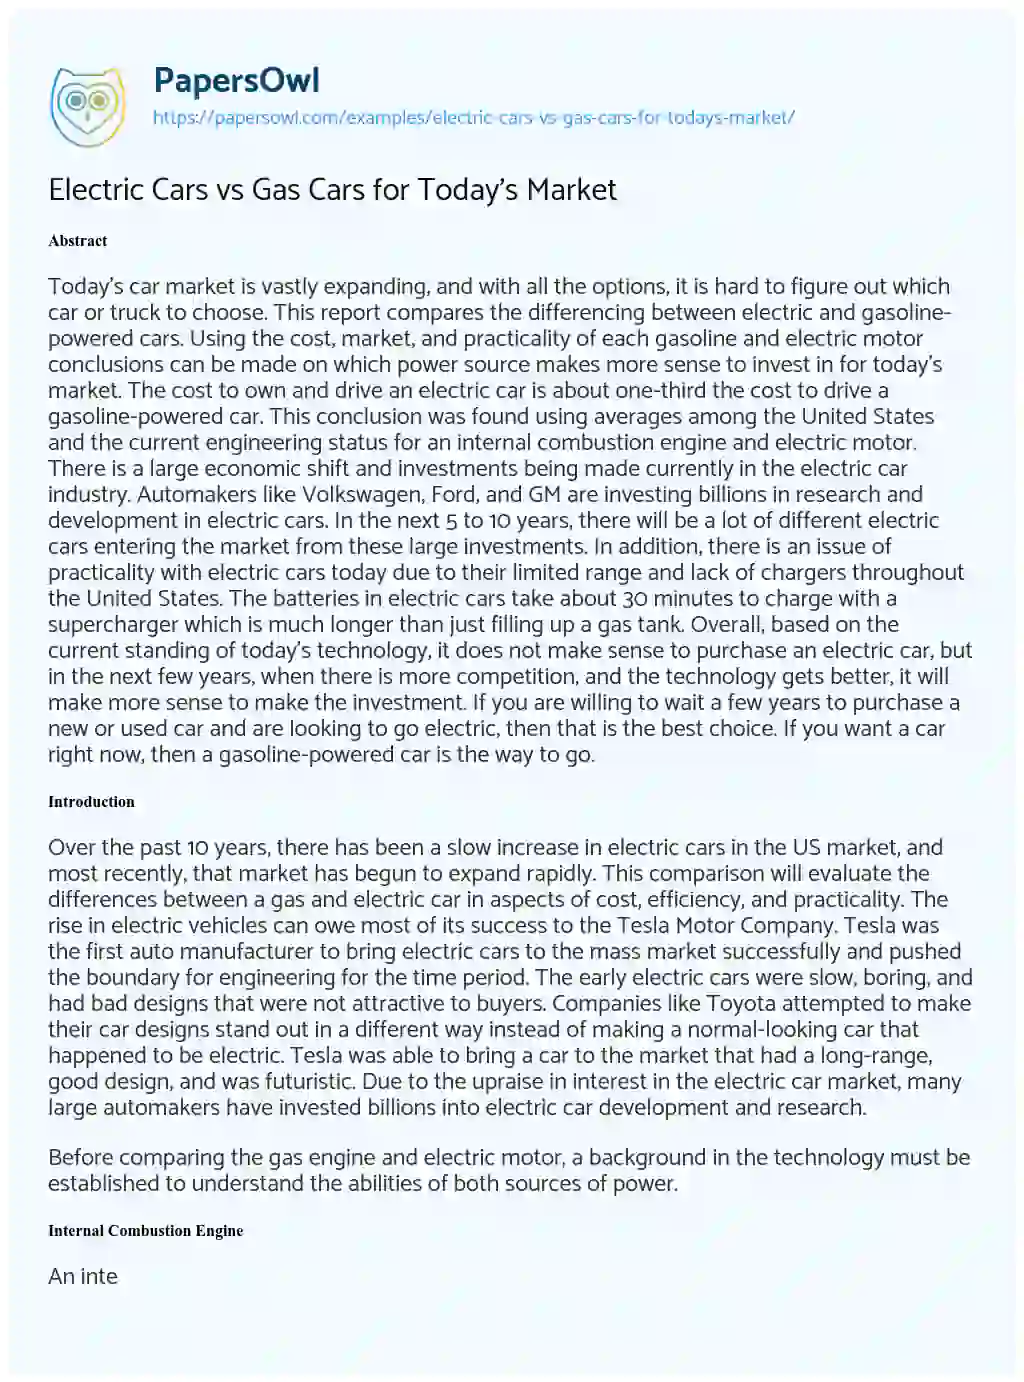 Essay on Electric Cars Vs Gas Cars for Today’s Market